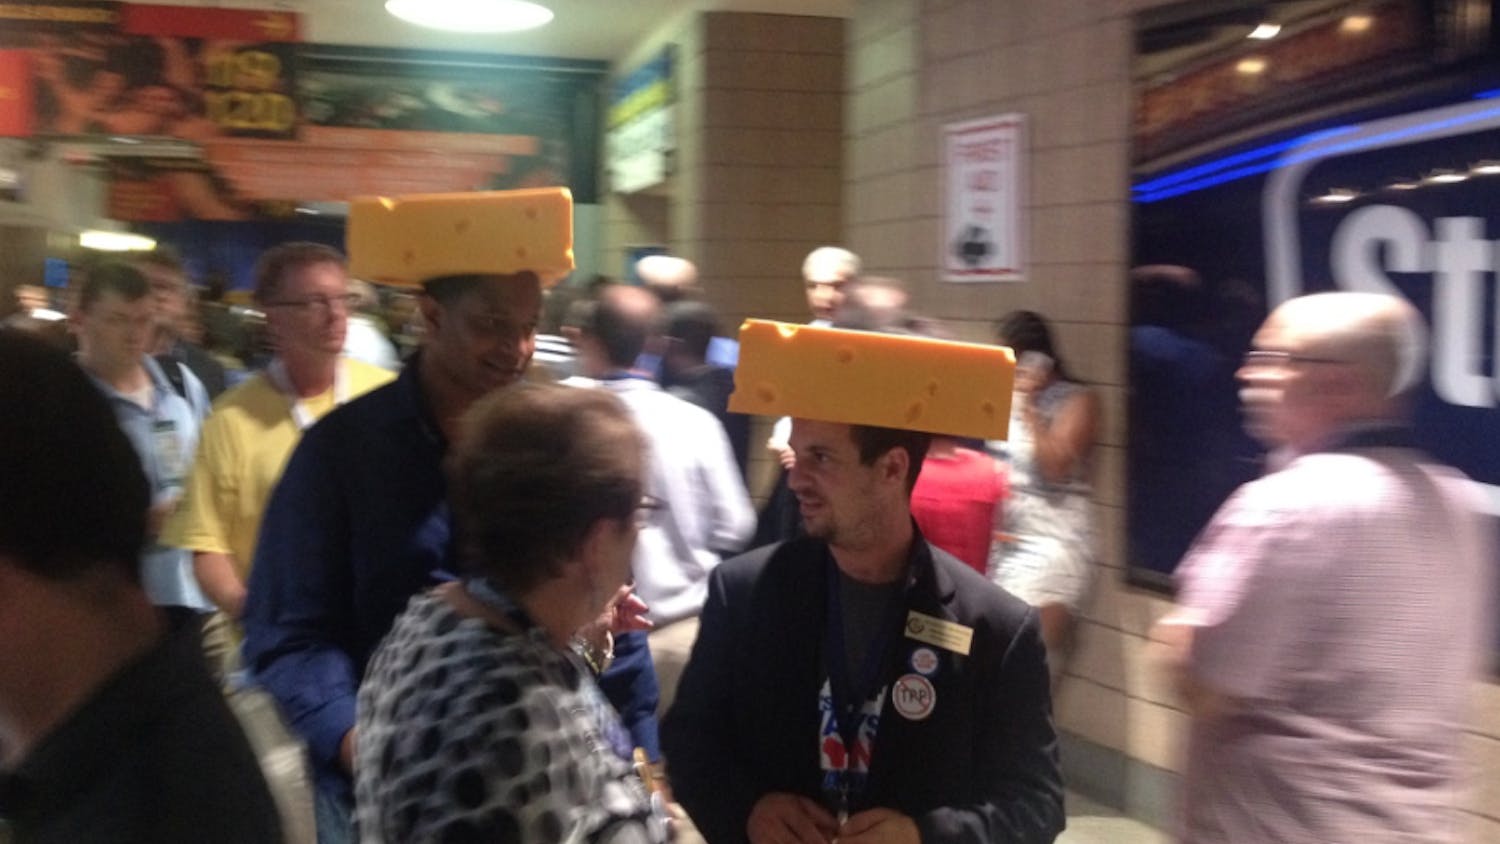 Two delegates from Wisconsin make their way through the crowd at the Democratic National Convention in Philadelphia on July 28, 2016.